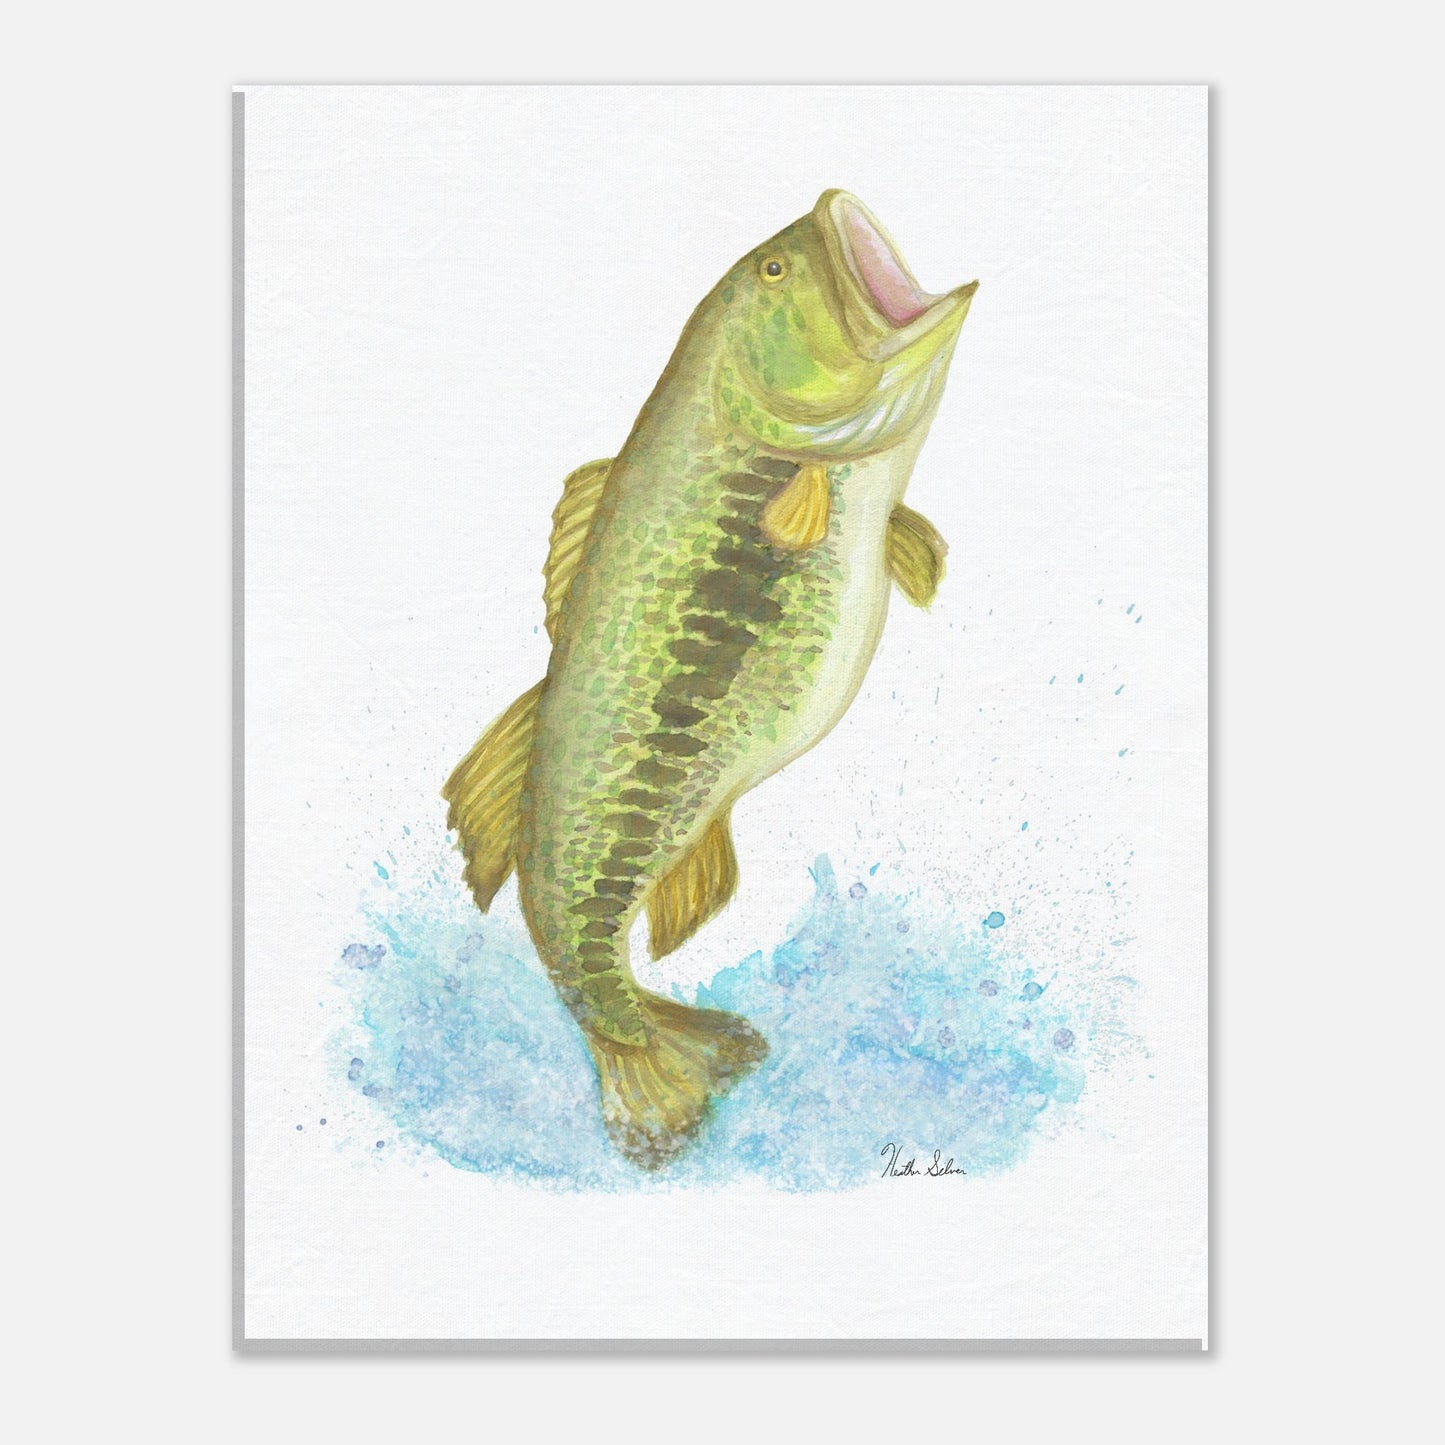 8 by 10 inch slim canvas wall art print featuring a watercolor painting of a largemouth bass leaping from the water. Hanging hardware included.